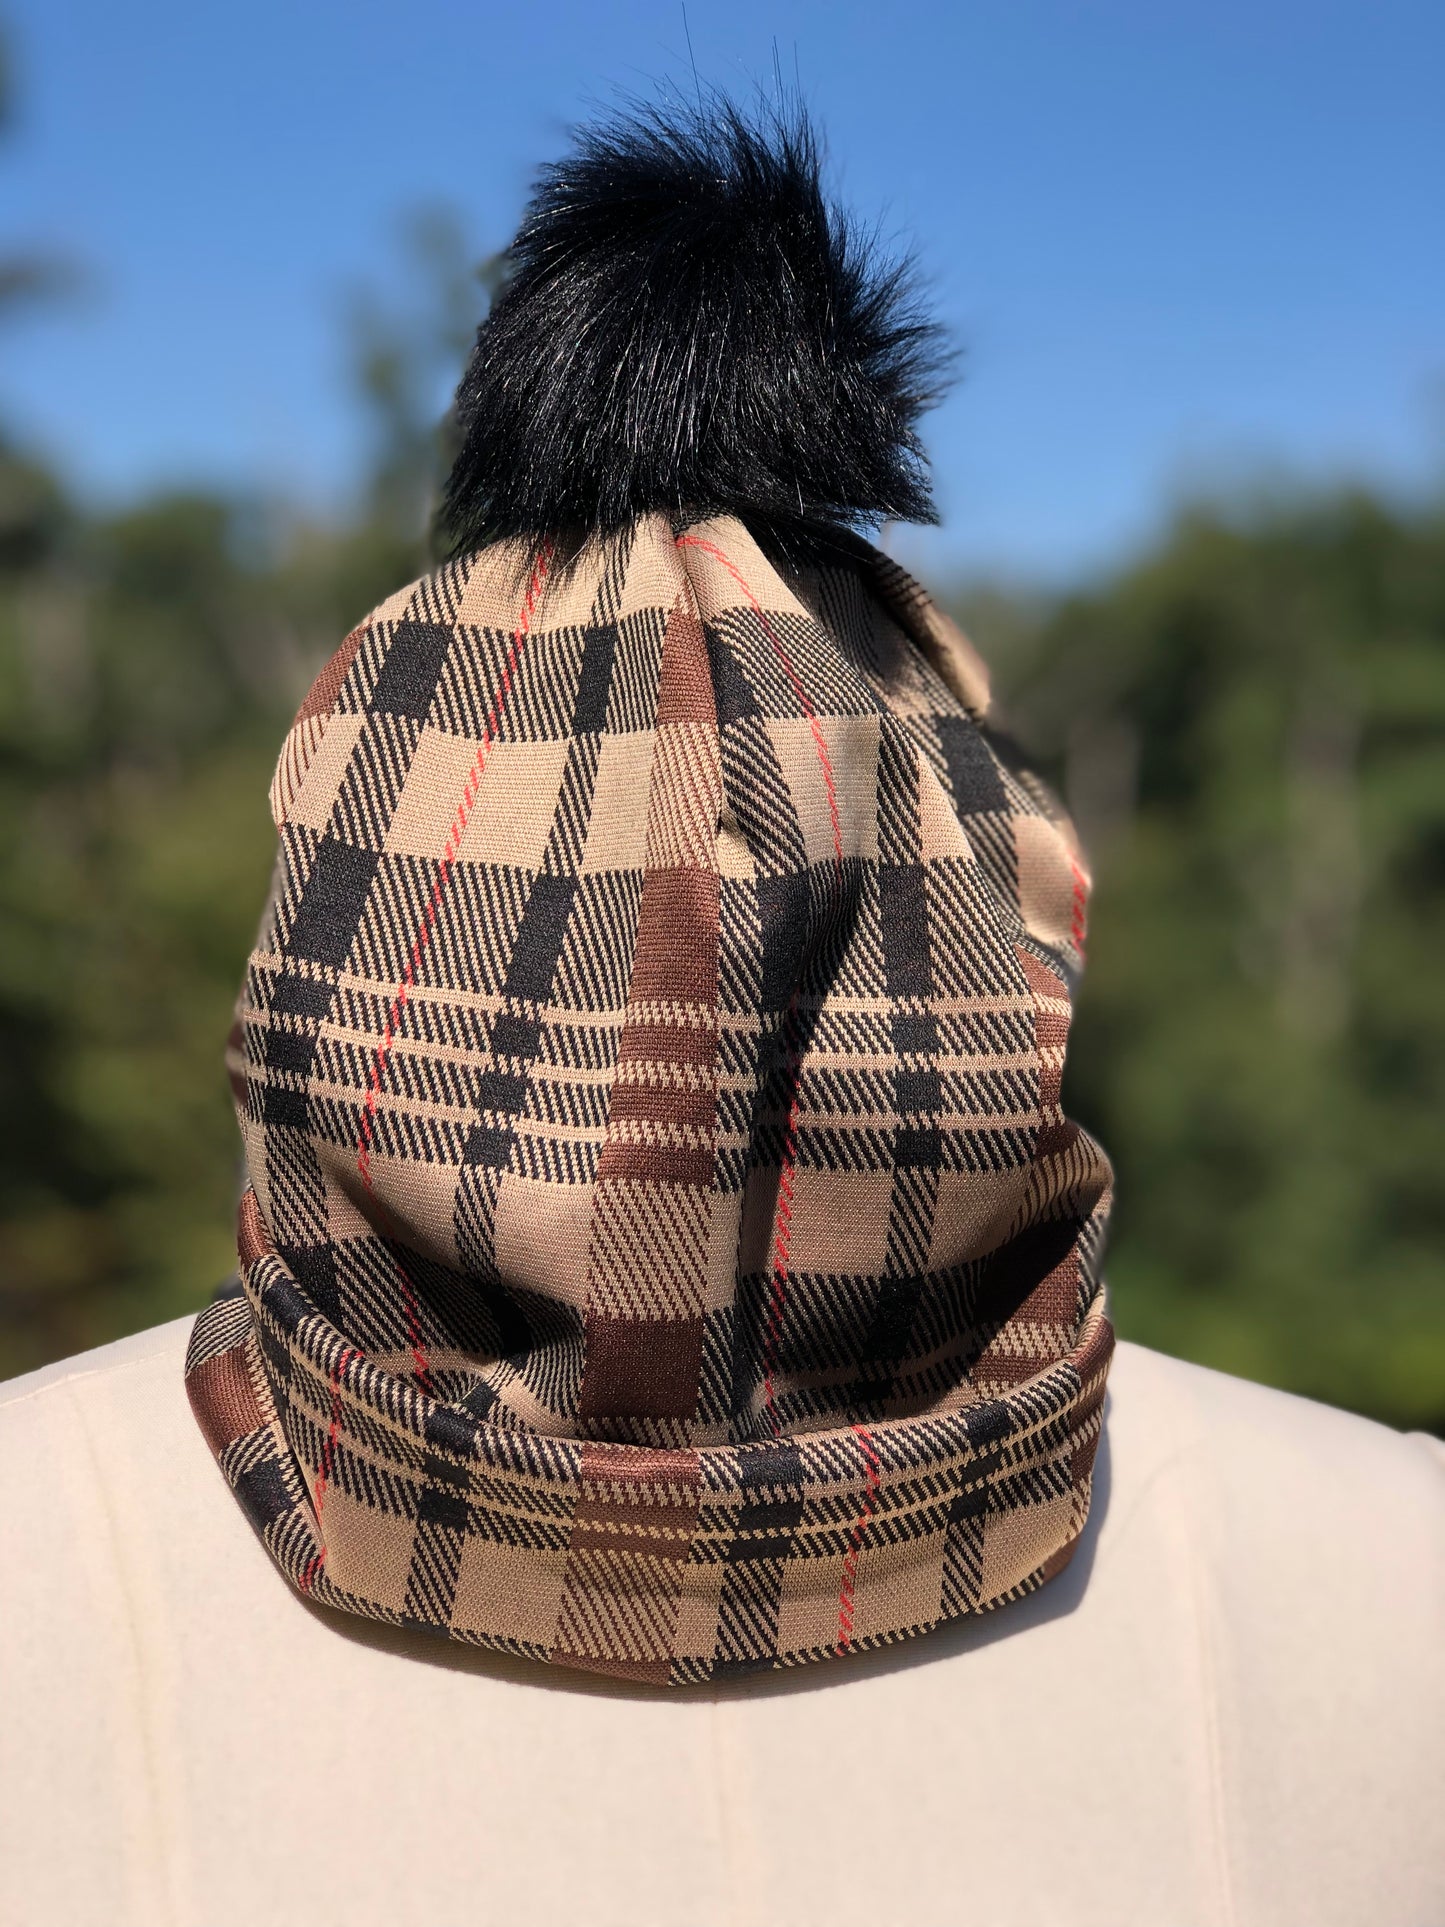 Tan, Brown and Black Plaid Winter Beanie With or Without Pom Pom - Limited Stock